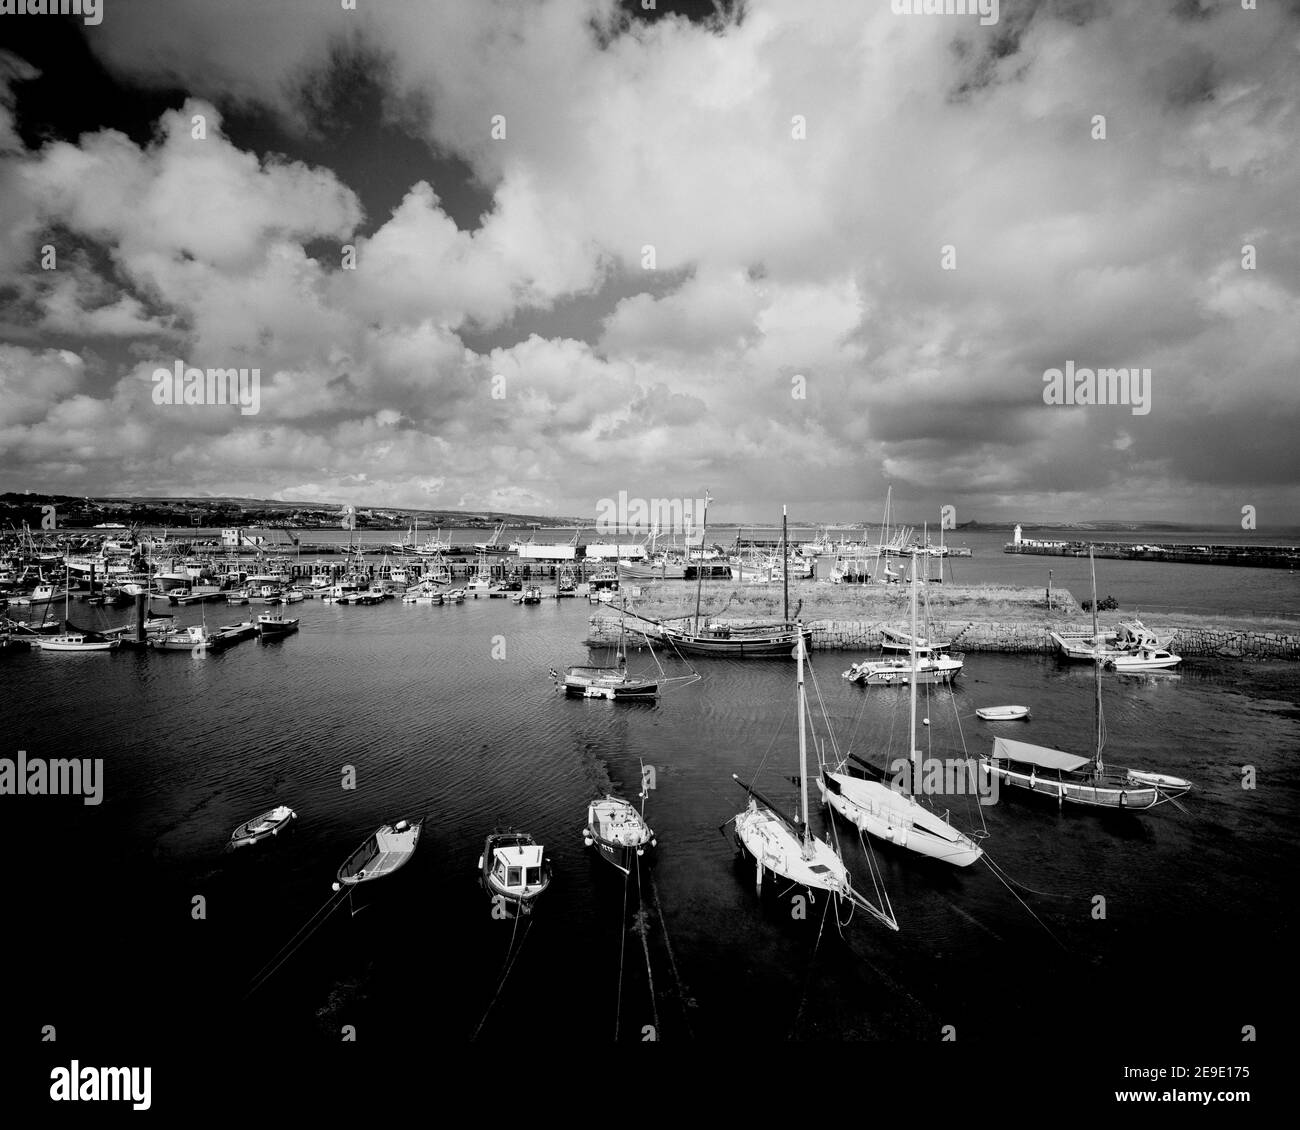 Black and White, Newlyn Harbour with yachts in foreground, Cornwall England Stock Photo